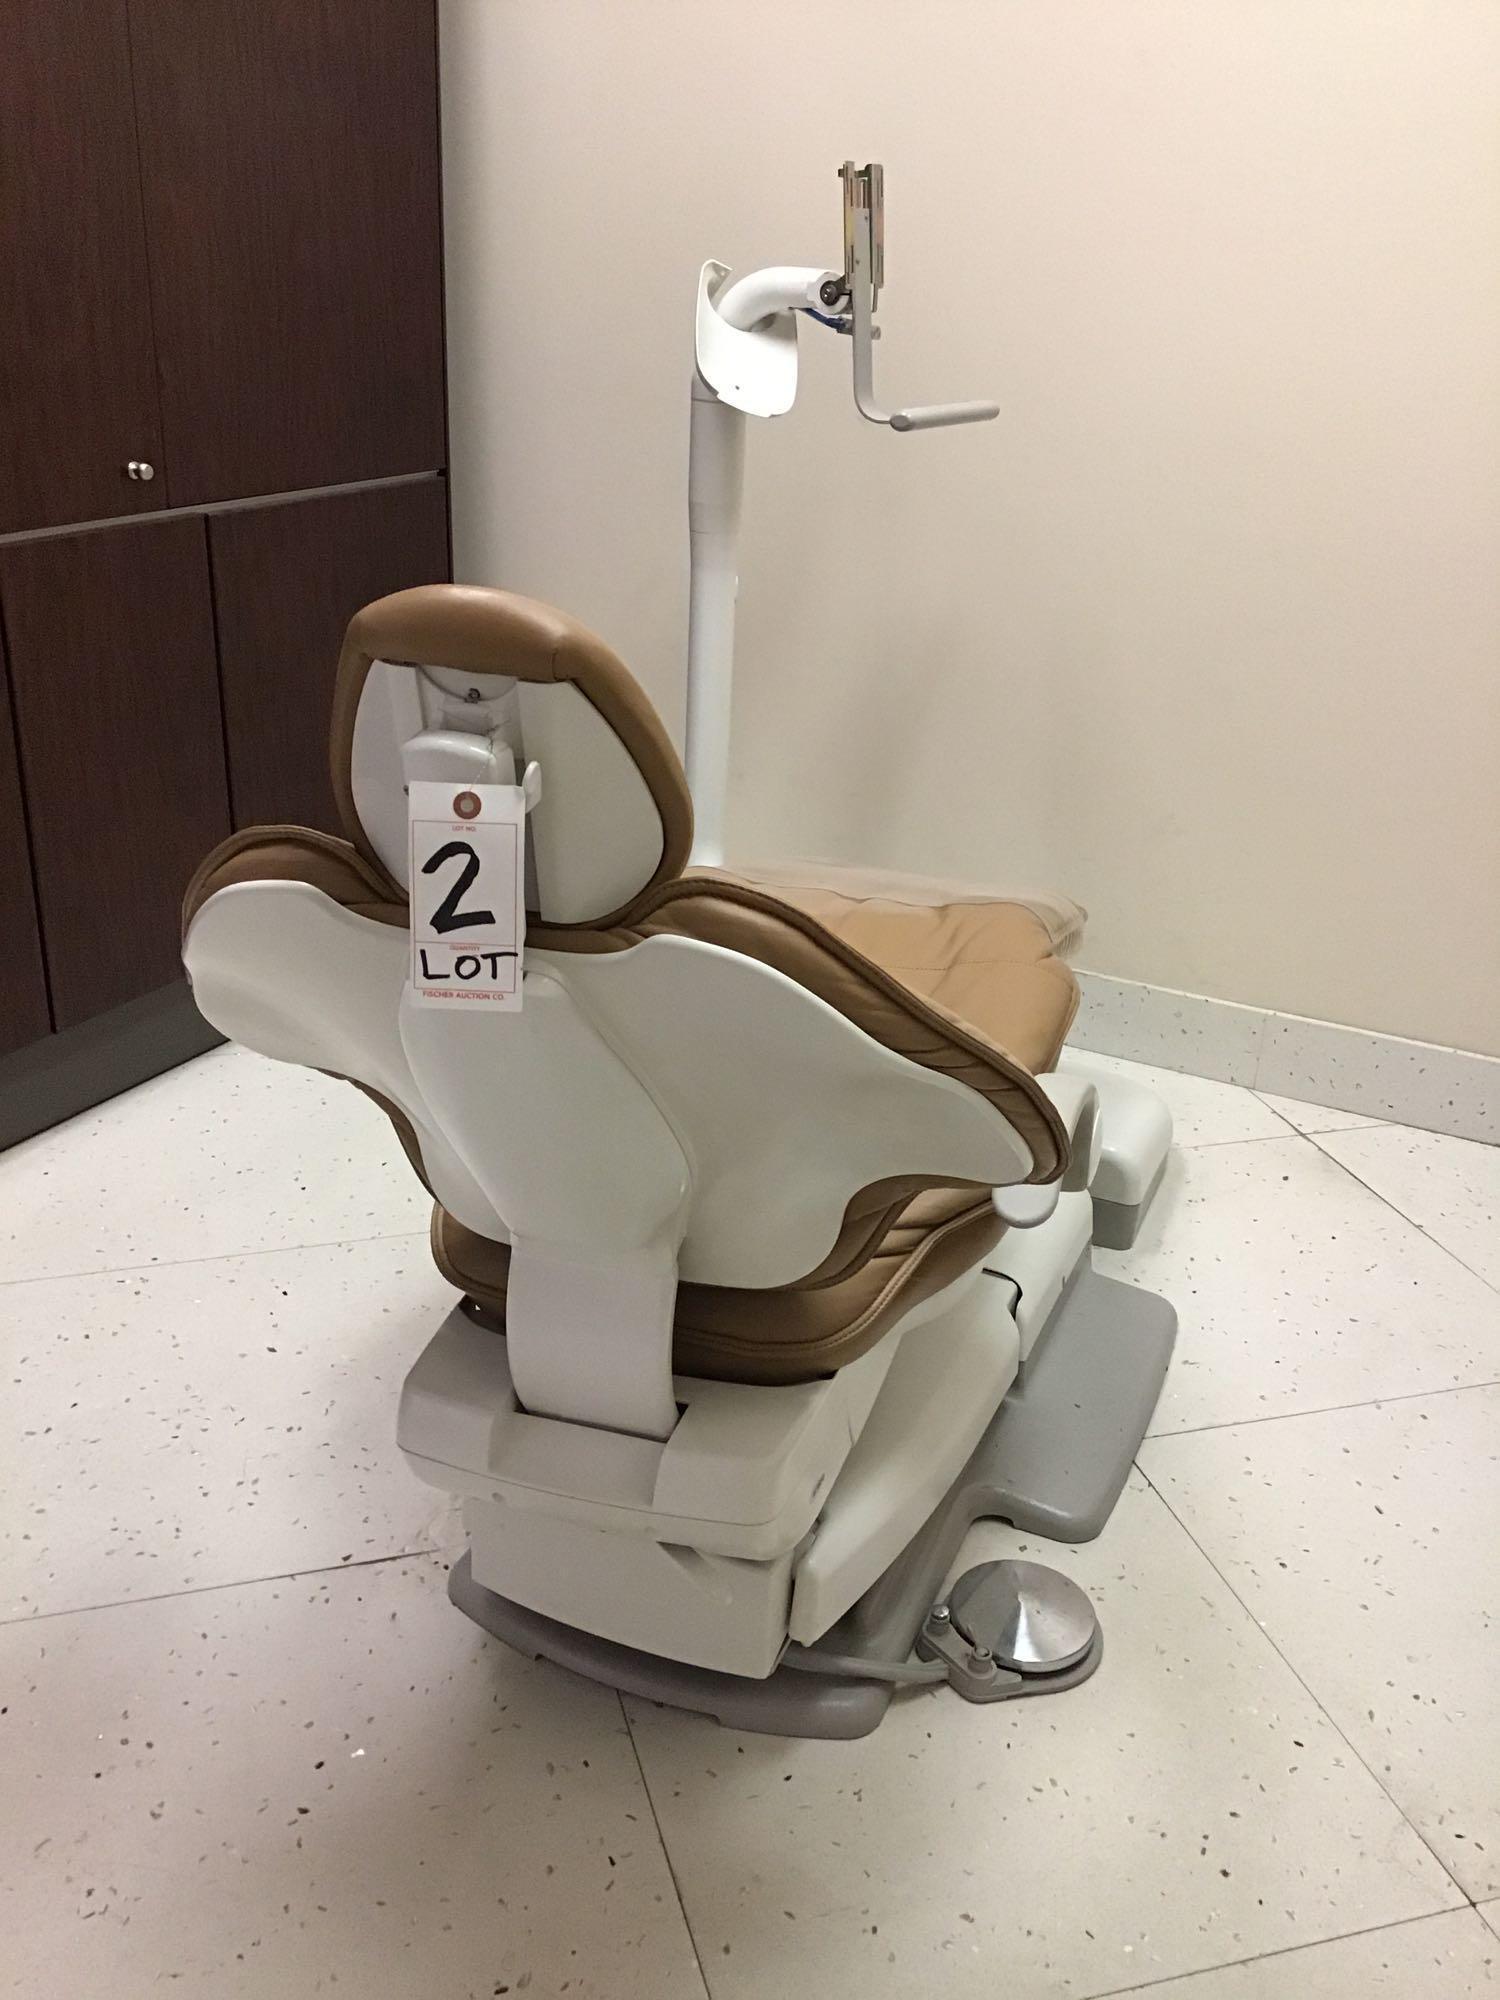 ADEC Dental Exam Chair and Delivery Unit